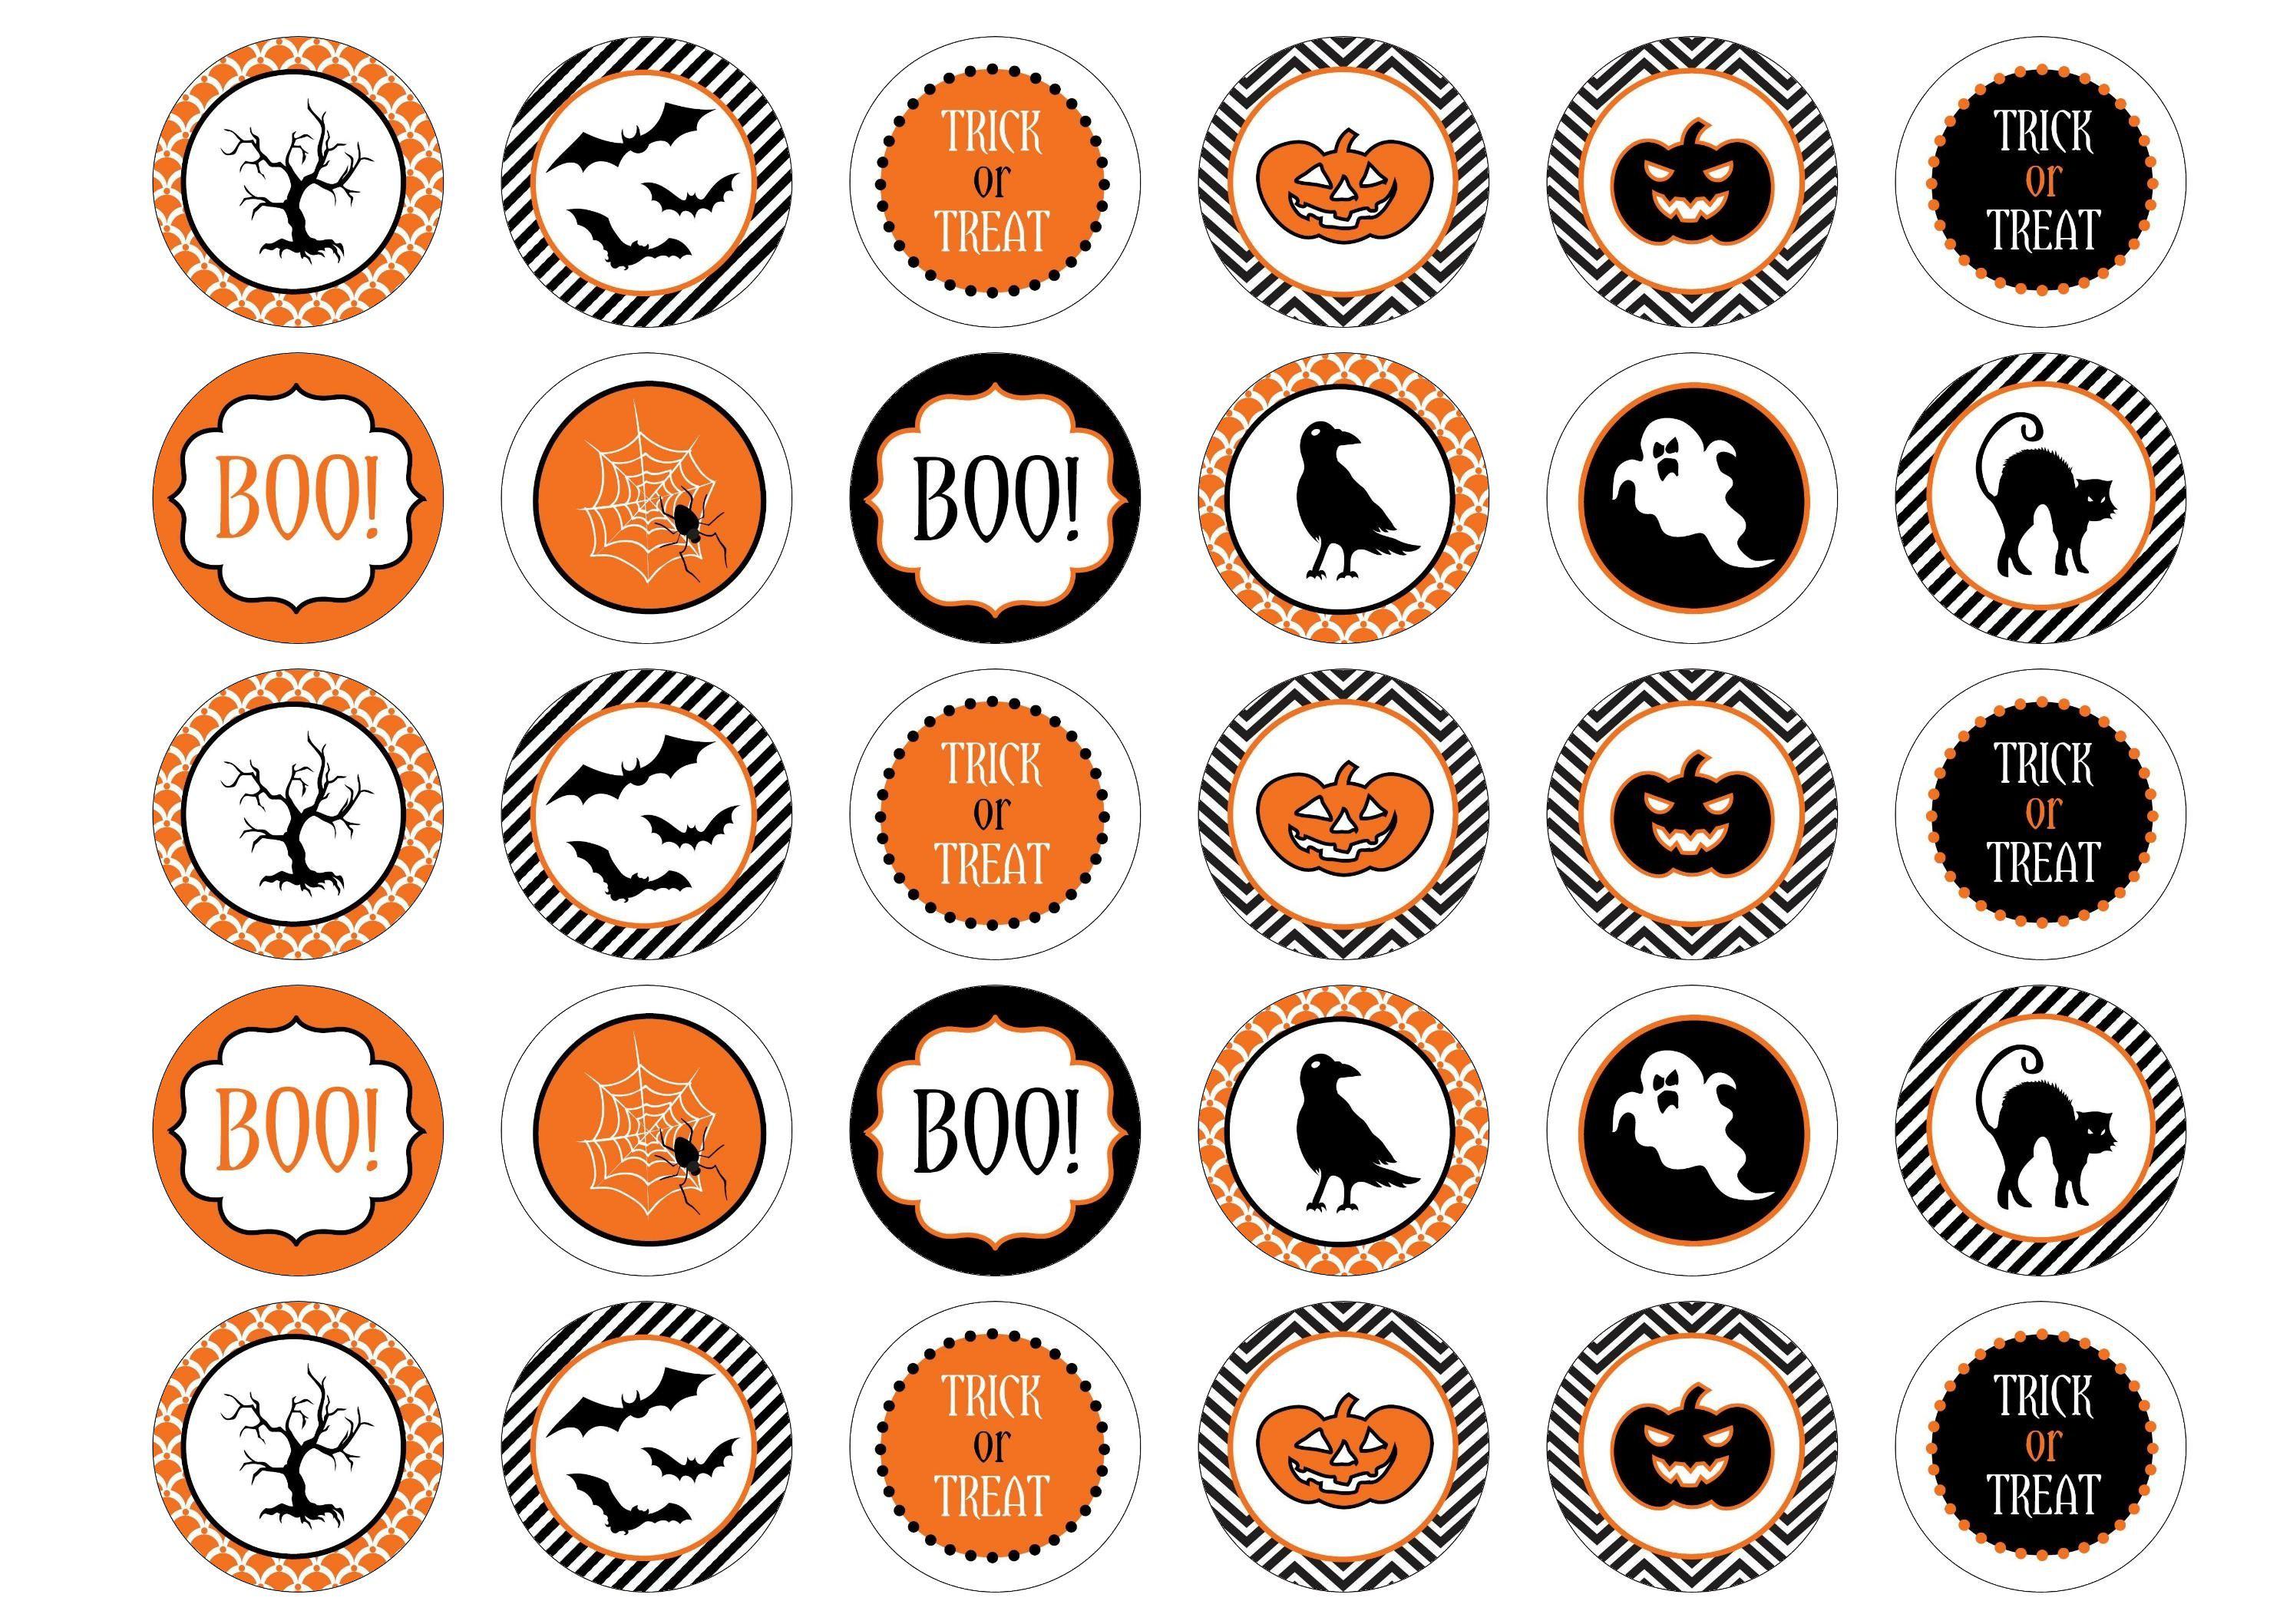 Edible printed cupcake toppers for halloween